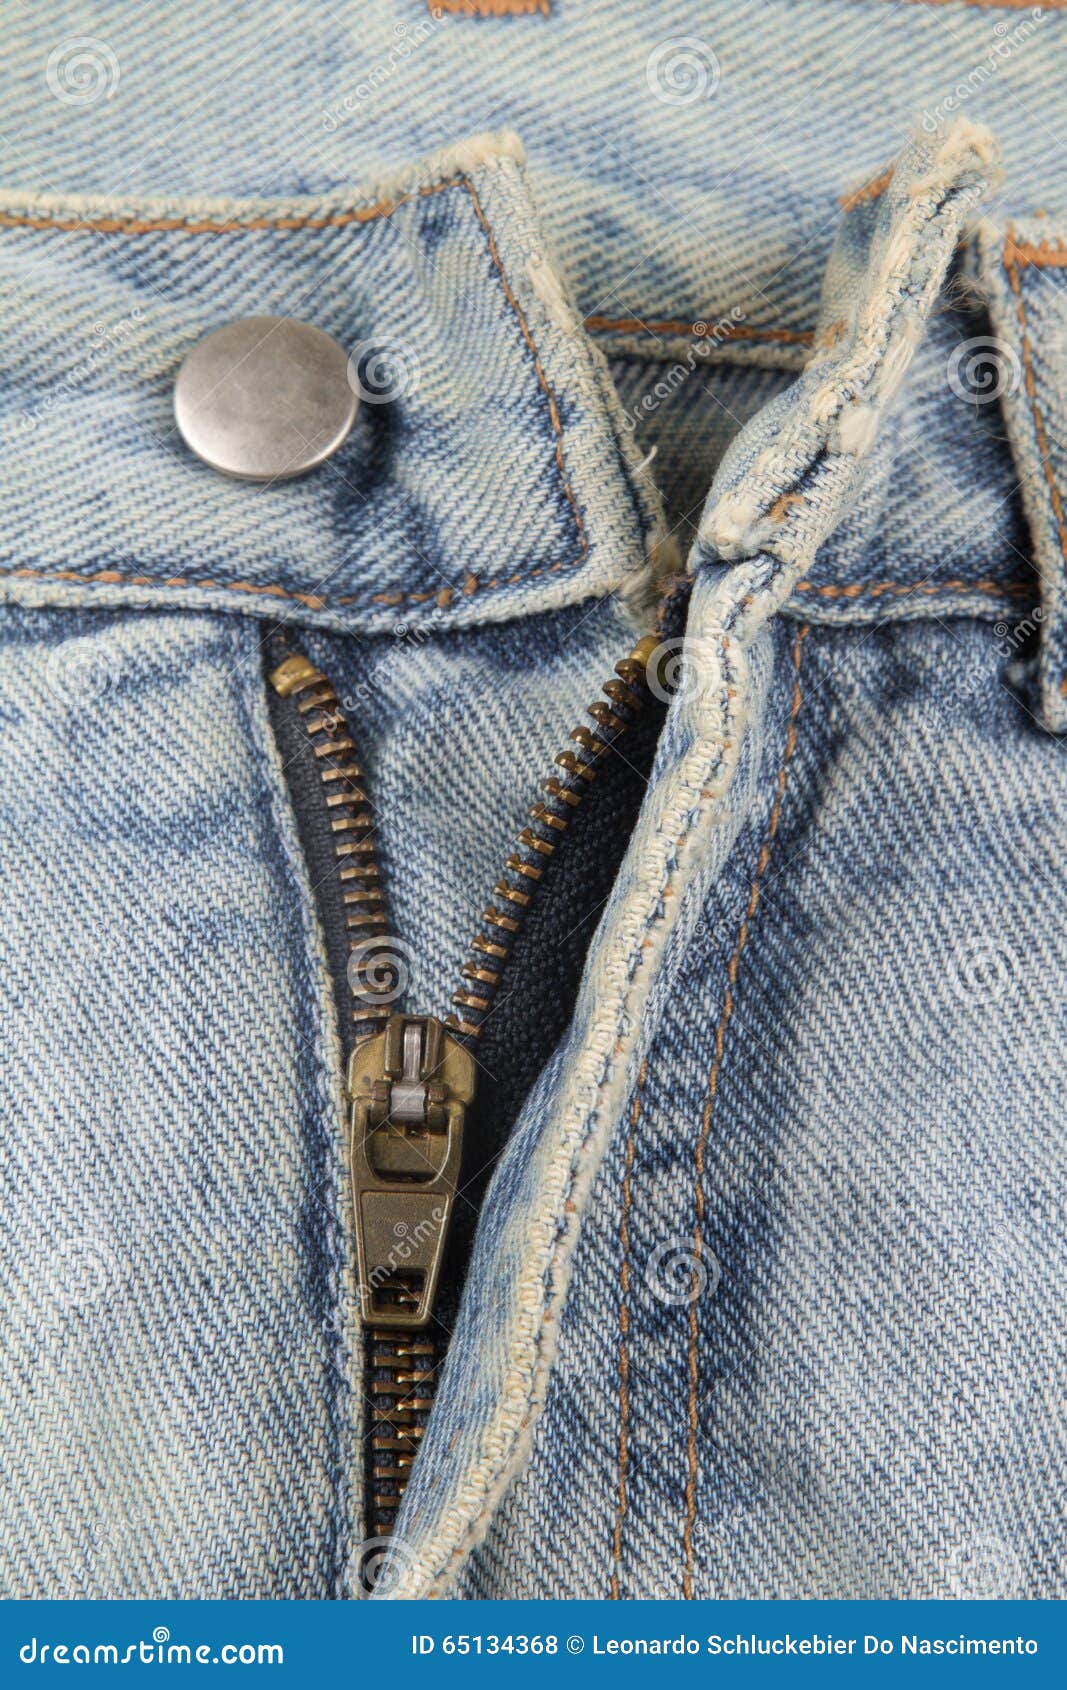 Old Jeans Zipper Open Stock Photo - Image: 65134368